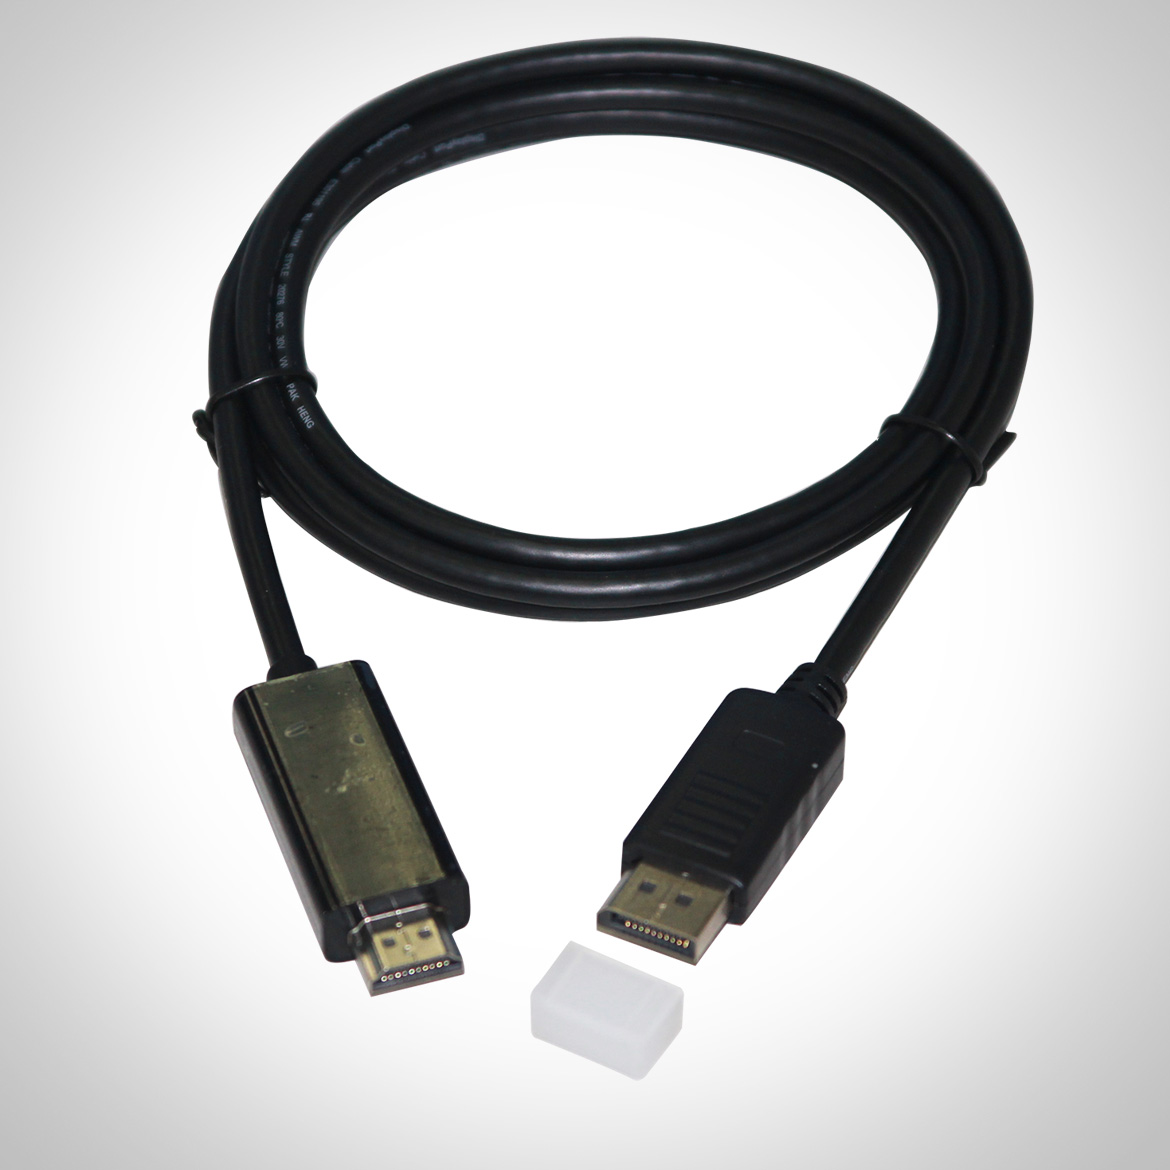 Dongle Cable